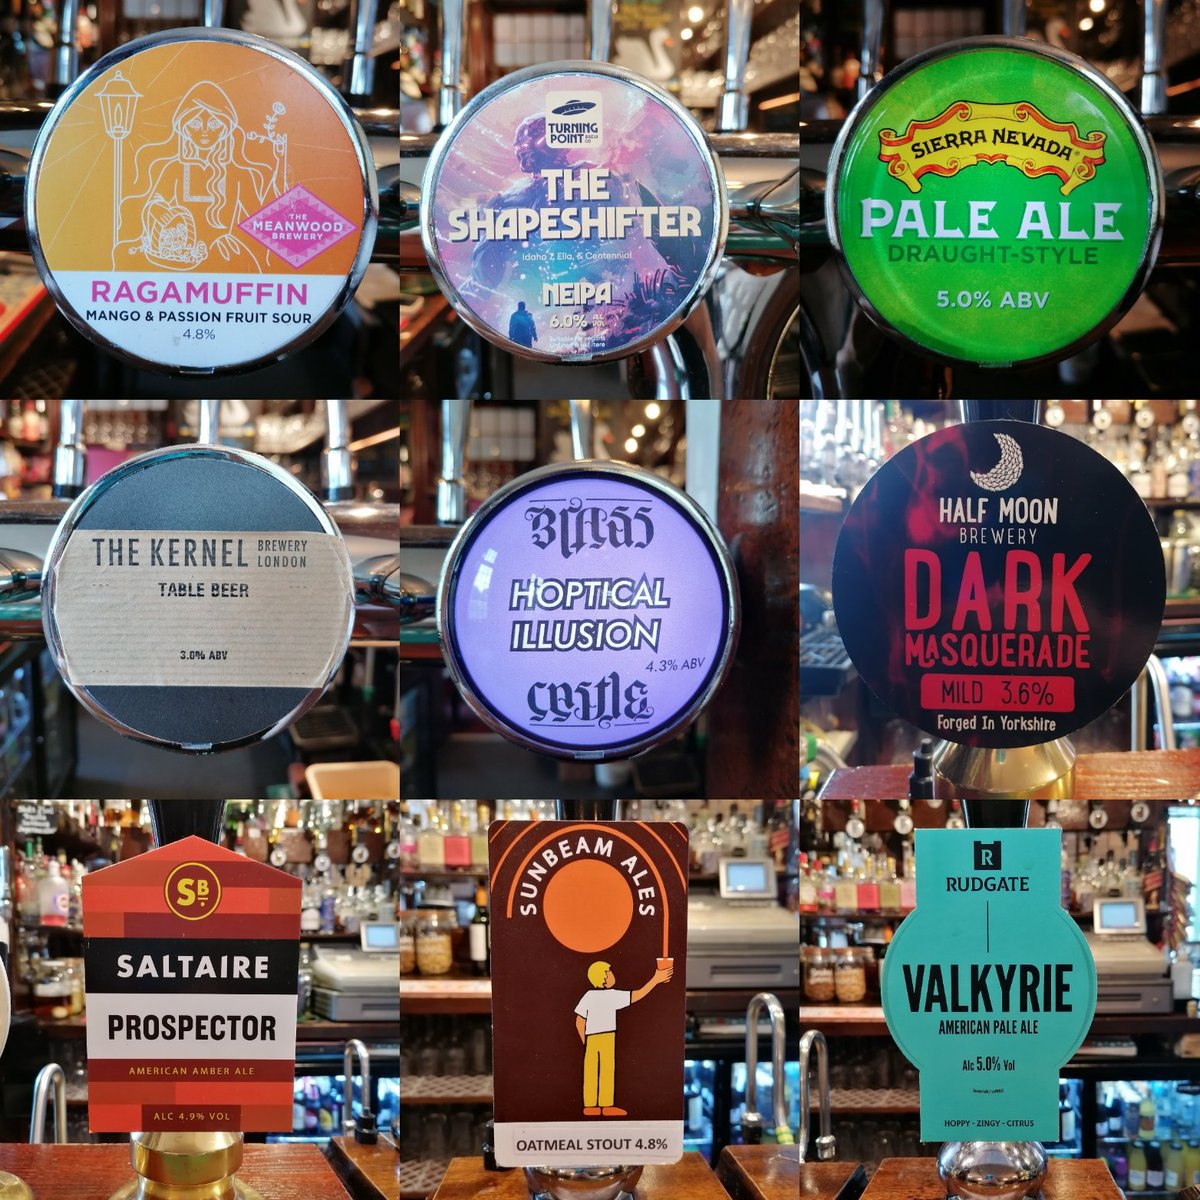 A warm #BankHoliday Monday 🌞(!) So the choice is between: 1. The #beergarden or 2. Our lovely Grade II listed interior (with the bonus of the #snooker final on the background.) Either way, as ever, we have a proper array of beautiful indie #beer, @yorkgin etc on our bar. 🍻🍸